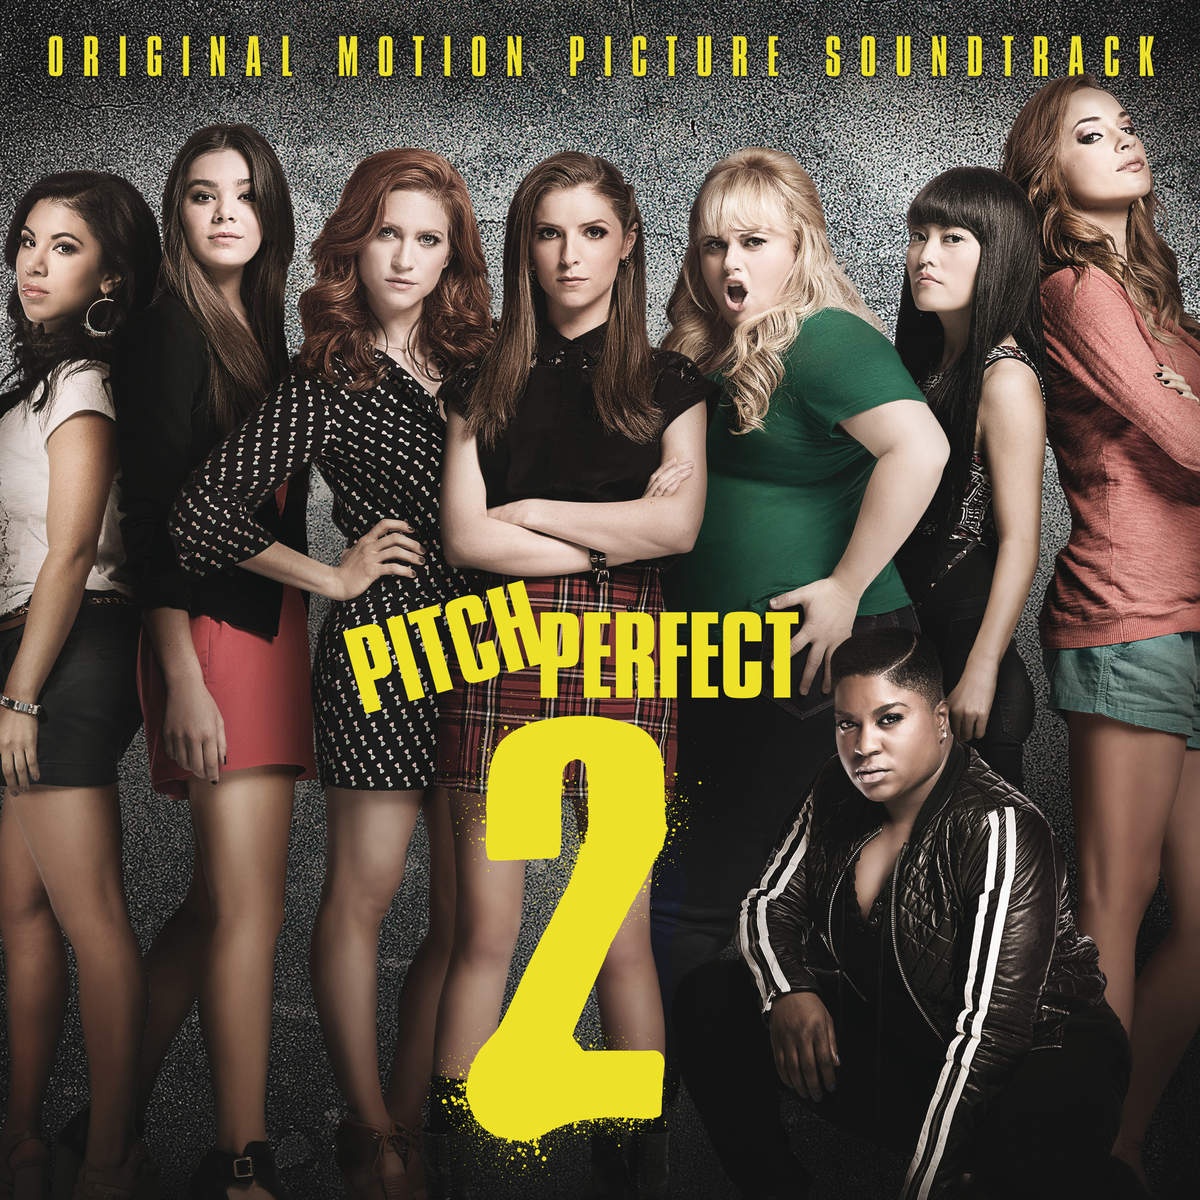 Jump - From "Pitch Perfect 2" Soundtrack